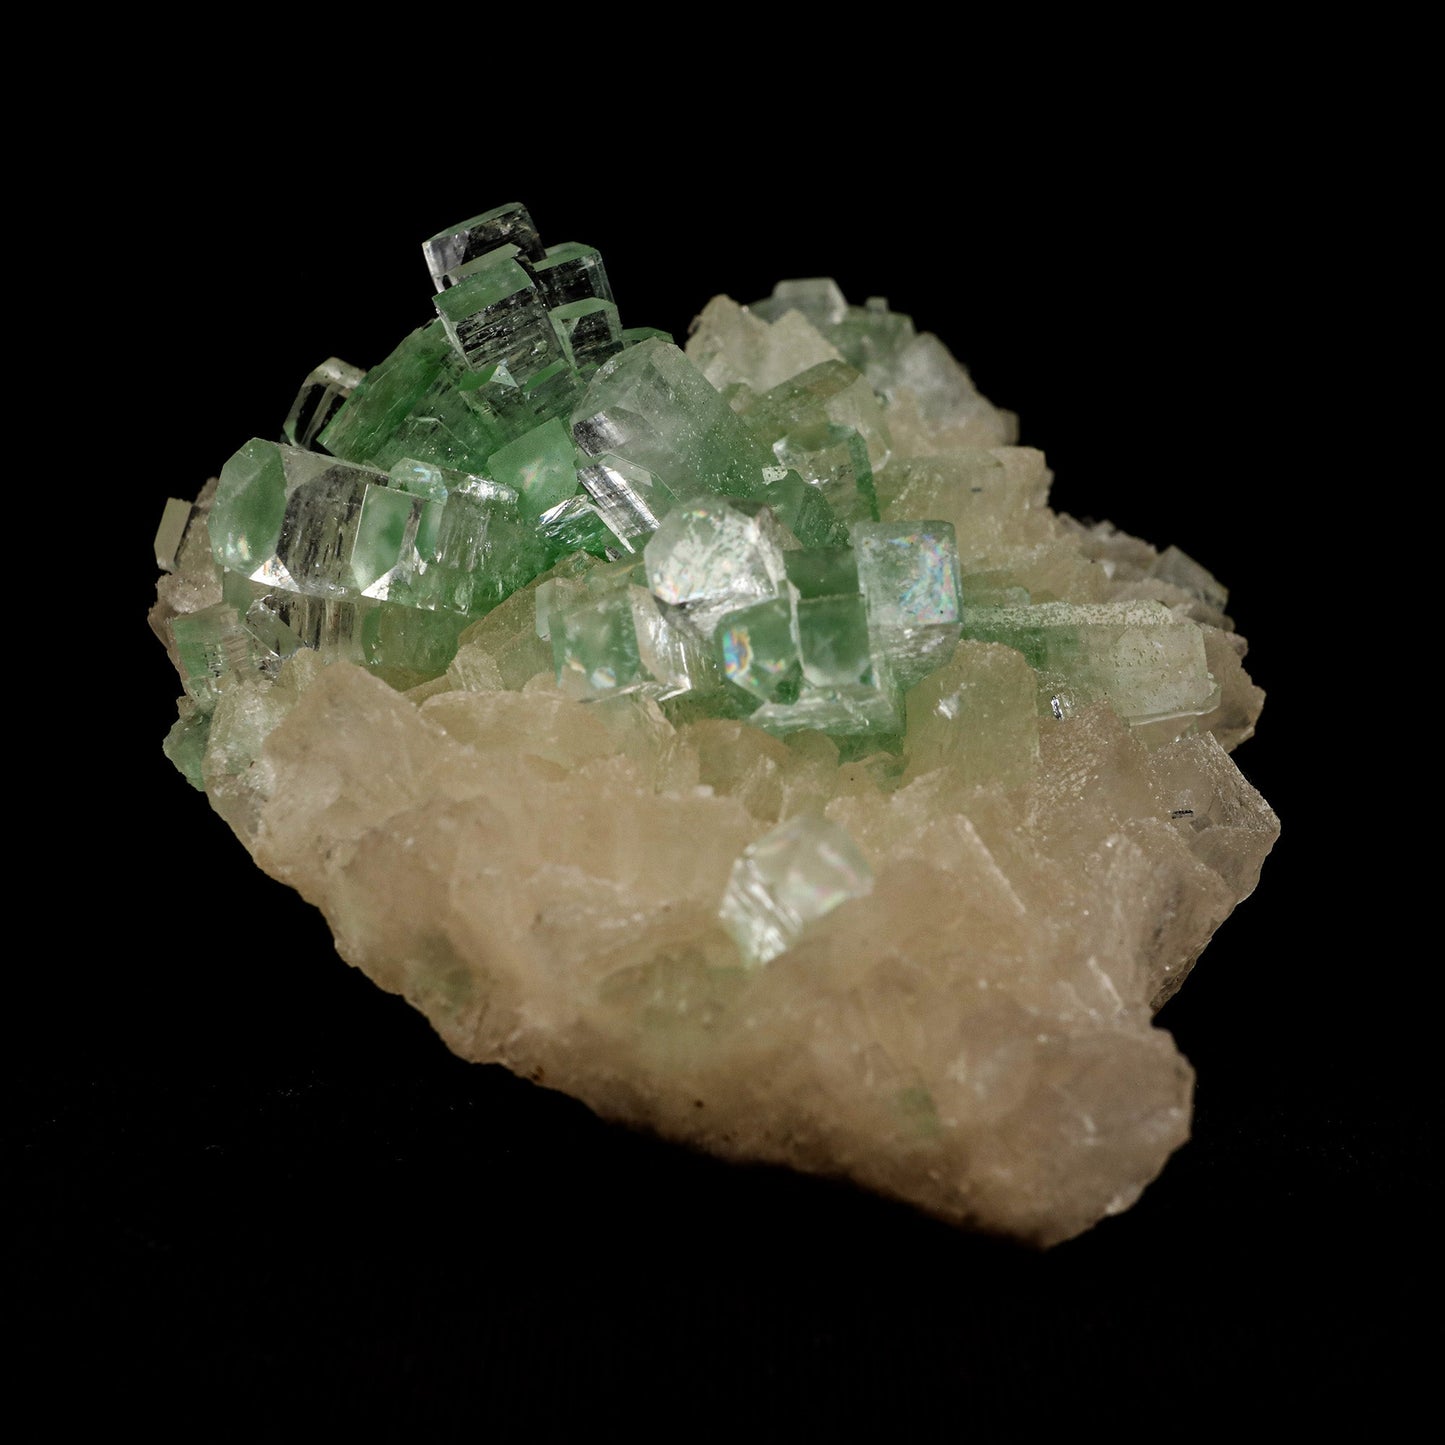 Green Apophyllite Disco Ball with Stilbite Natural Mineral Specimen #…  https://www.superbminerals.us/products/green-apophyllite-disco-ball-with-stilbite-natural-mineral-specimen-b-5120  Features: The finding of these spectacular fluorapophyllite "disco balls" while excavating huge diameter water wells is without a doubt one of the Deccan Traps' Great Finds.A "small ball" over... "ball" of densely intergrown, gemmy, highly glassy, mint-green to colourless tetragonal crystals with pinacoidal termination